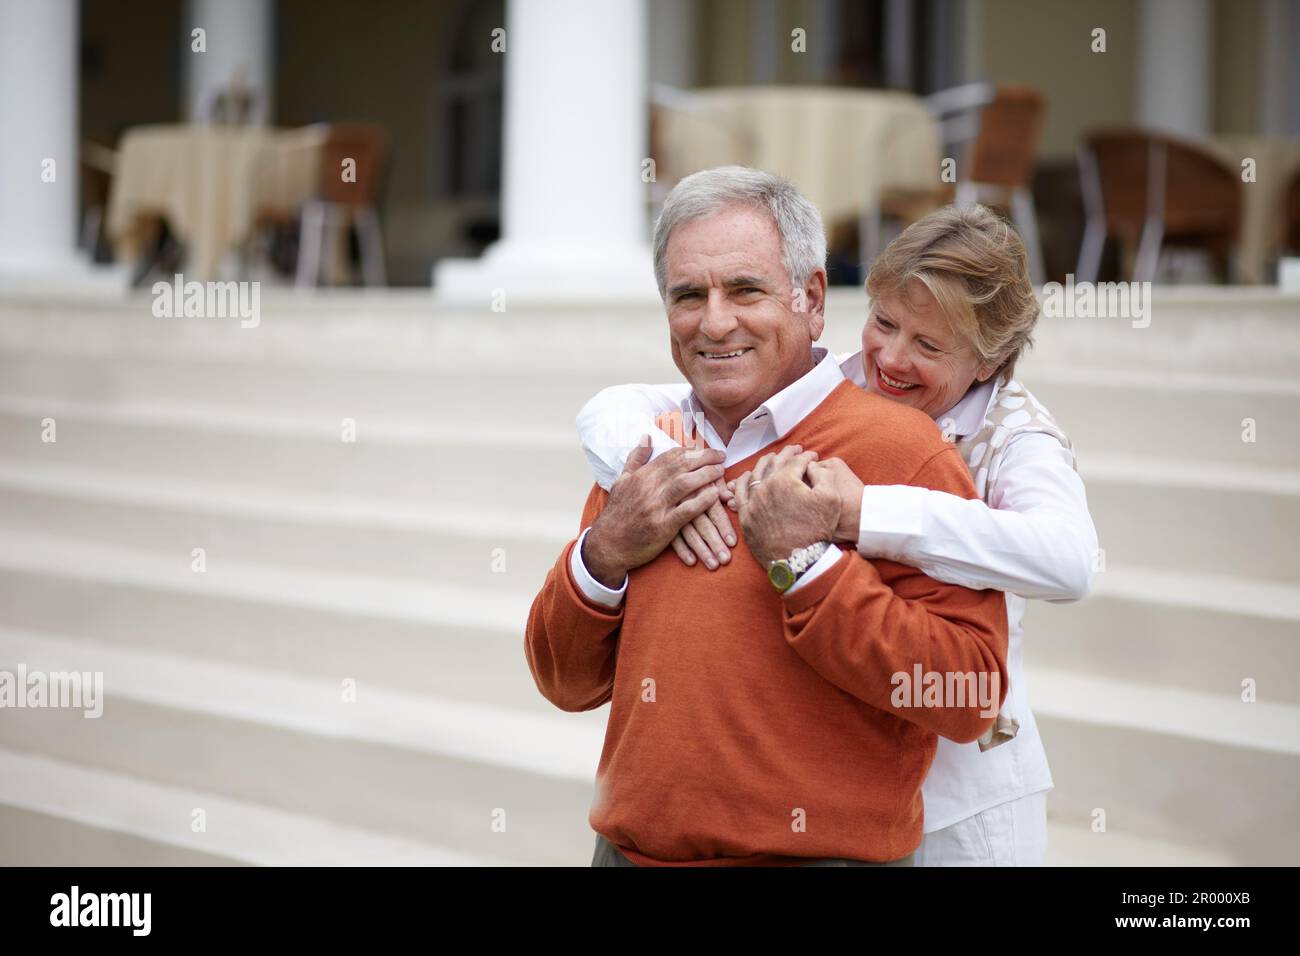 Their love grows with each passing year. an affectionate senior couple on vacation. Stock Photo